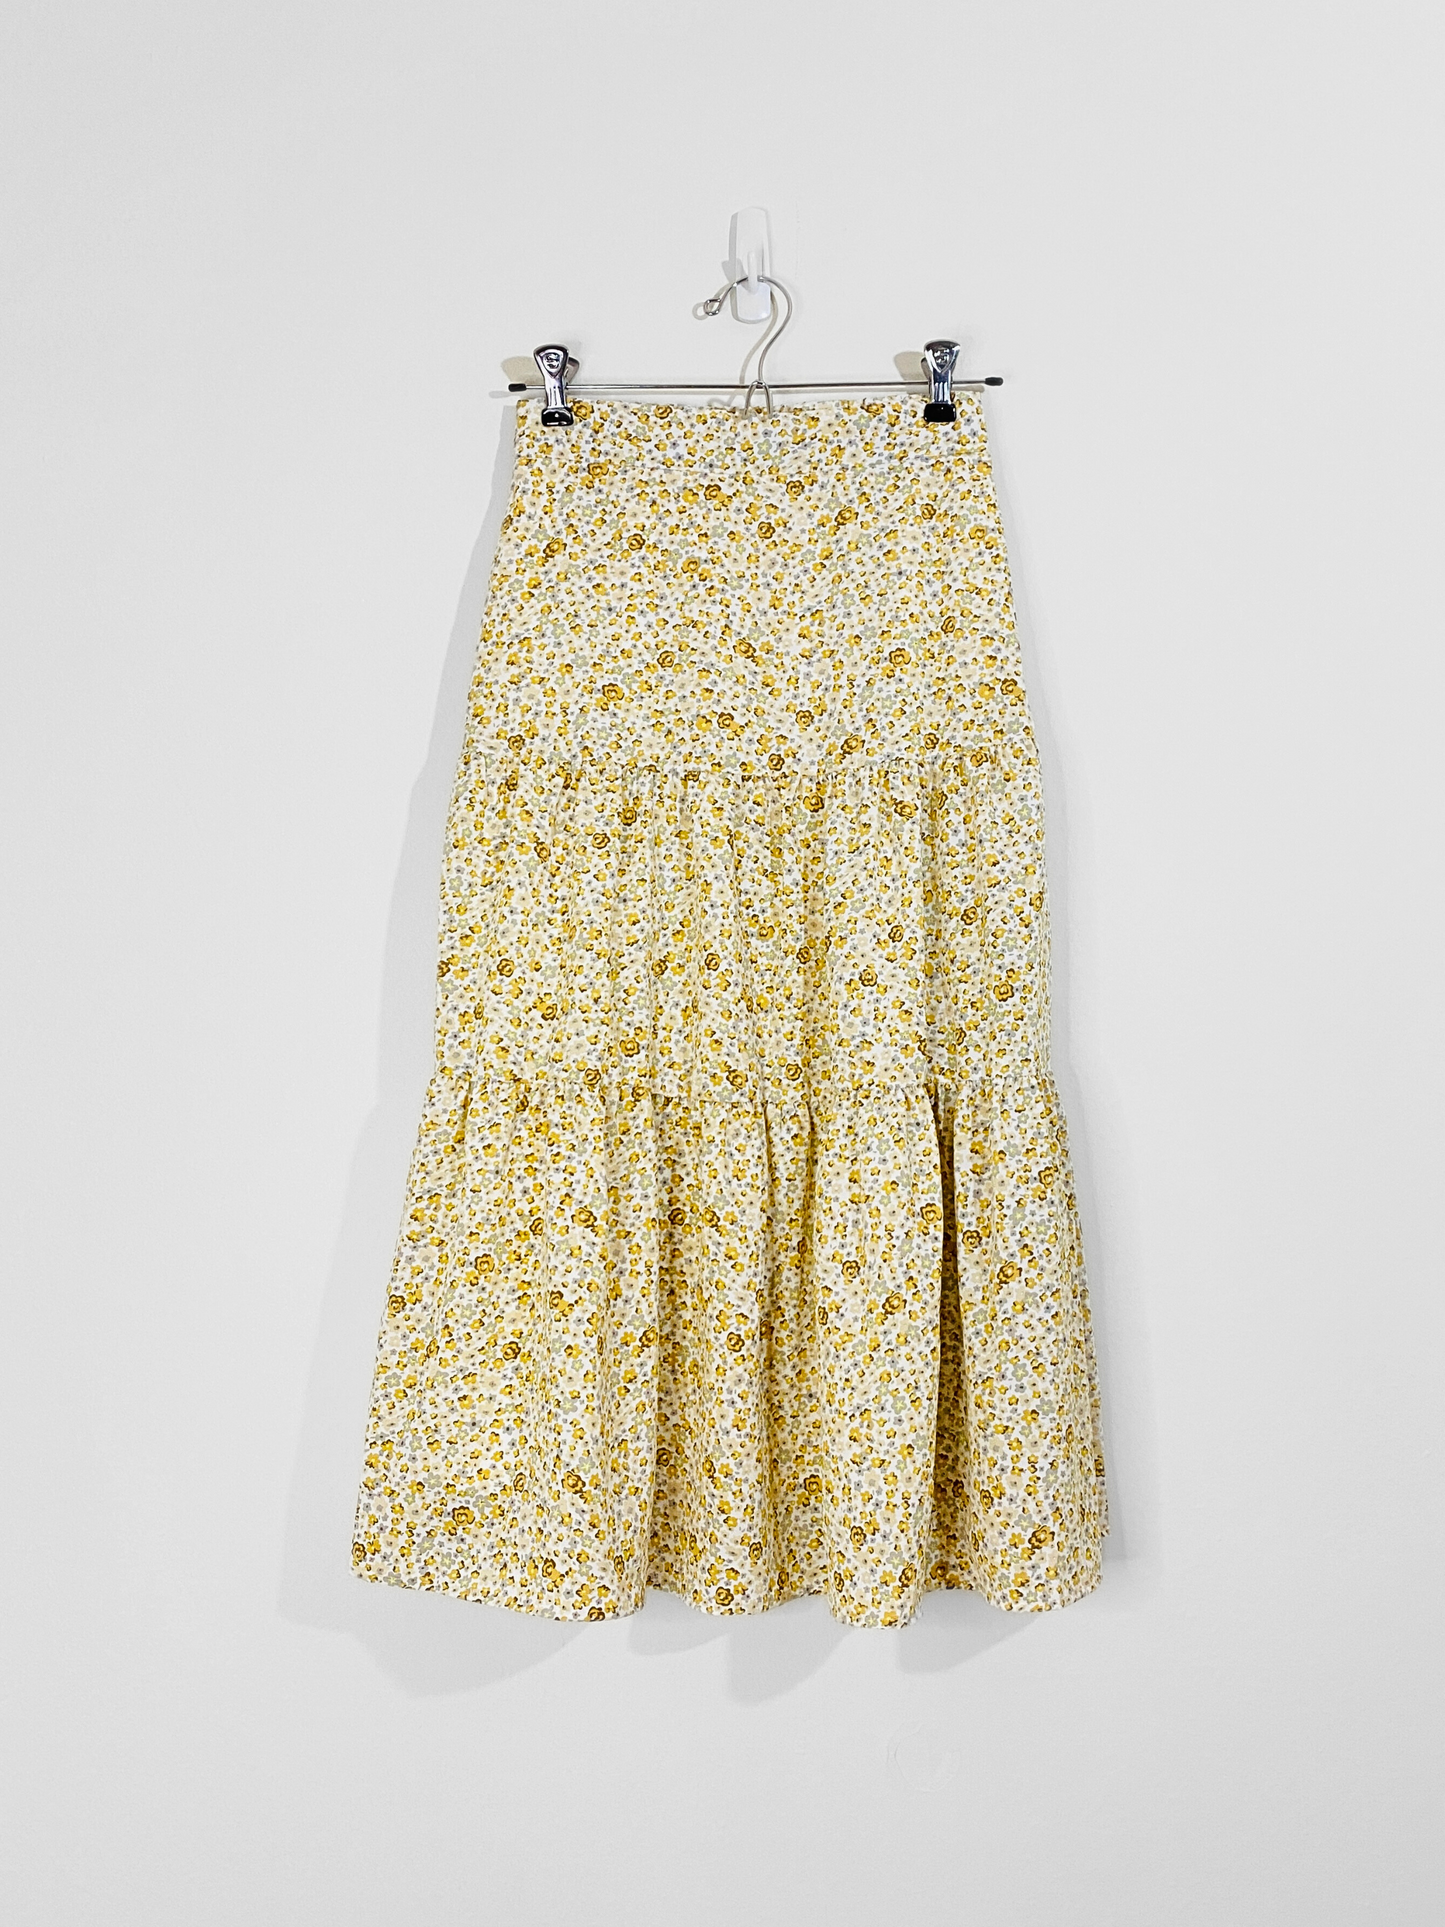 Yellow Floral Skirt (Small)